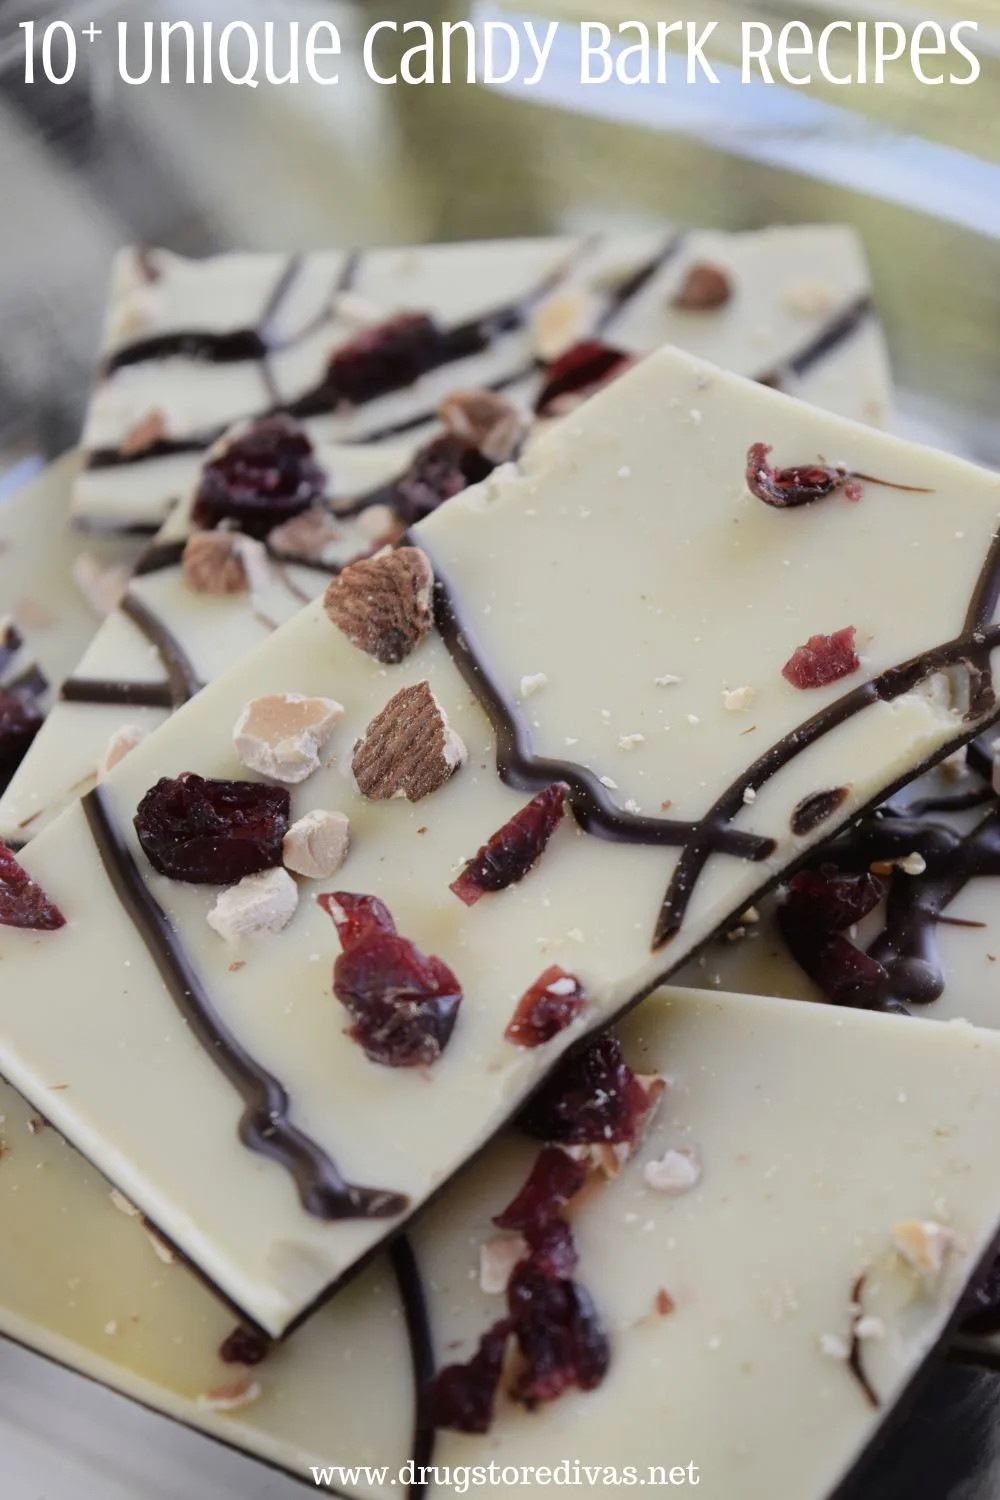 White chocolate bark with nuts and dried fruit and chocolate drizzles on top with the words 